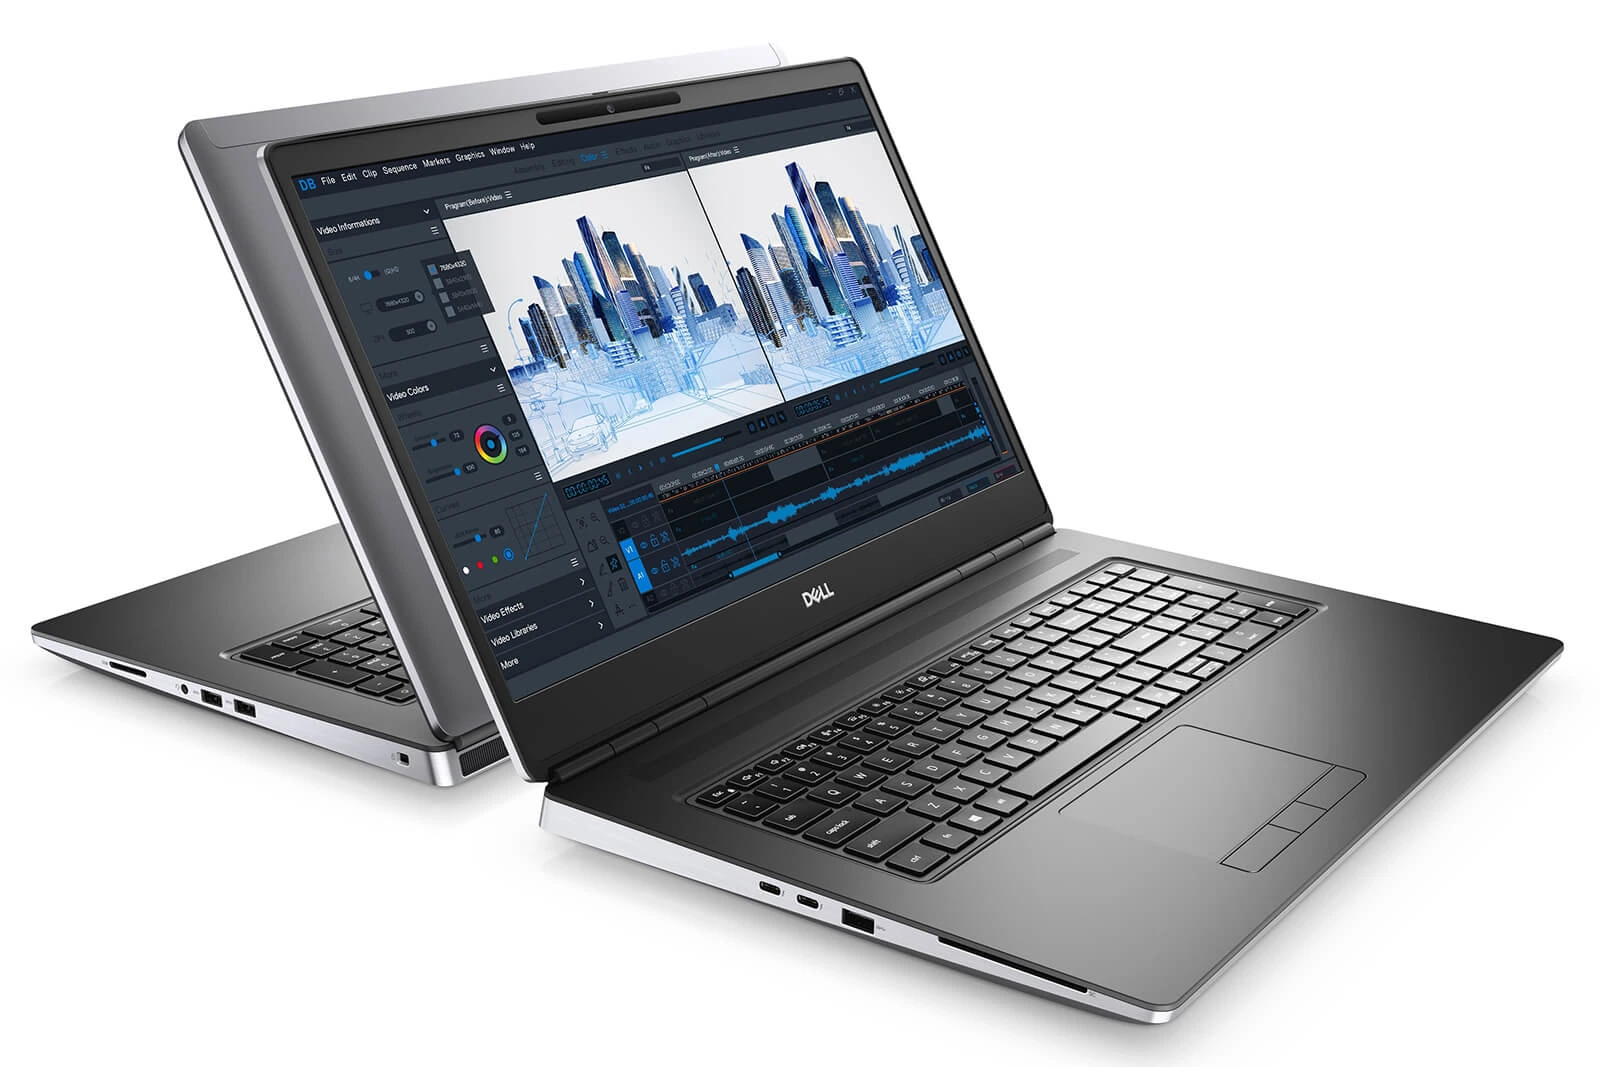 Dell Precision 7760 Mobile Workstation Features 01